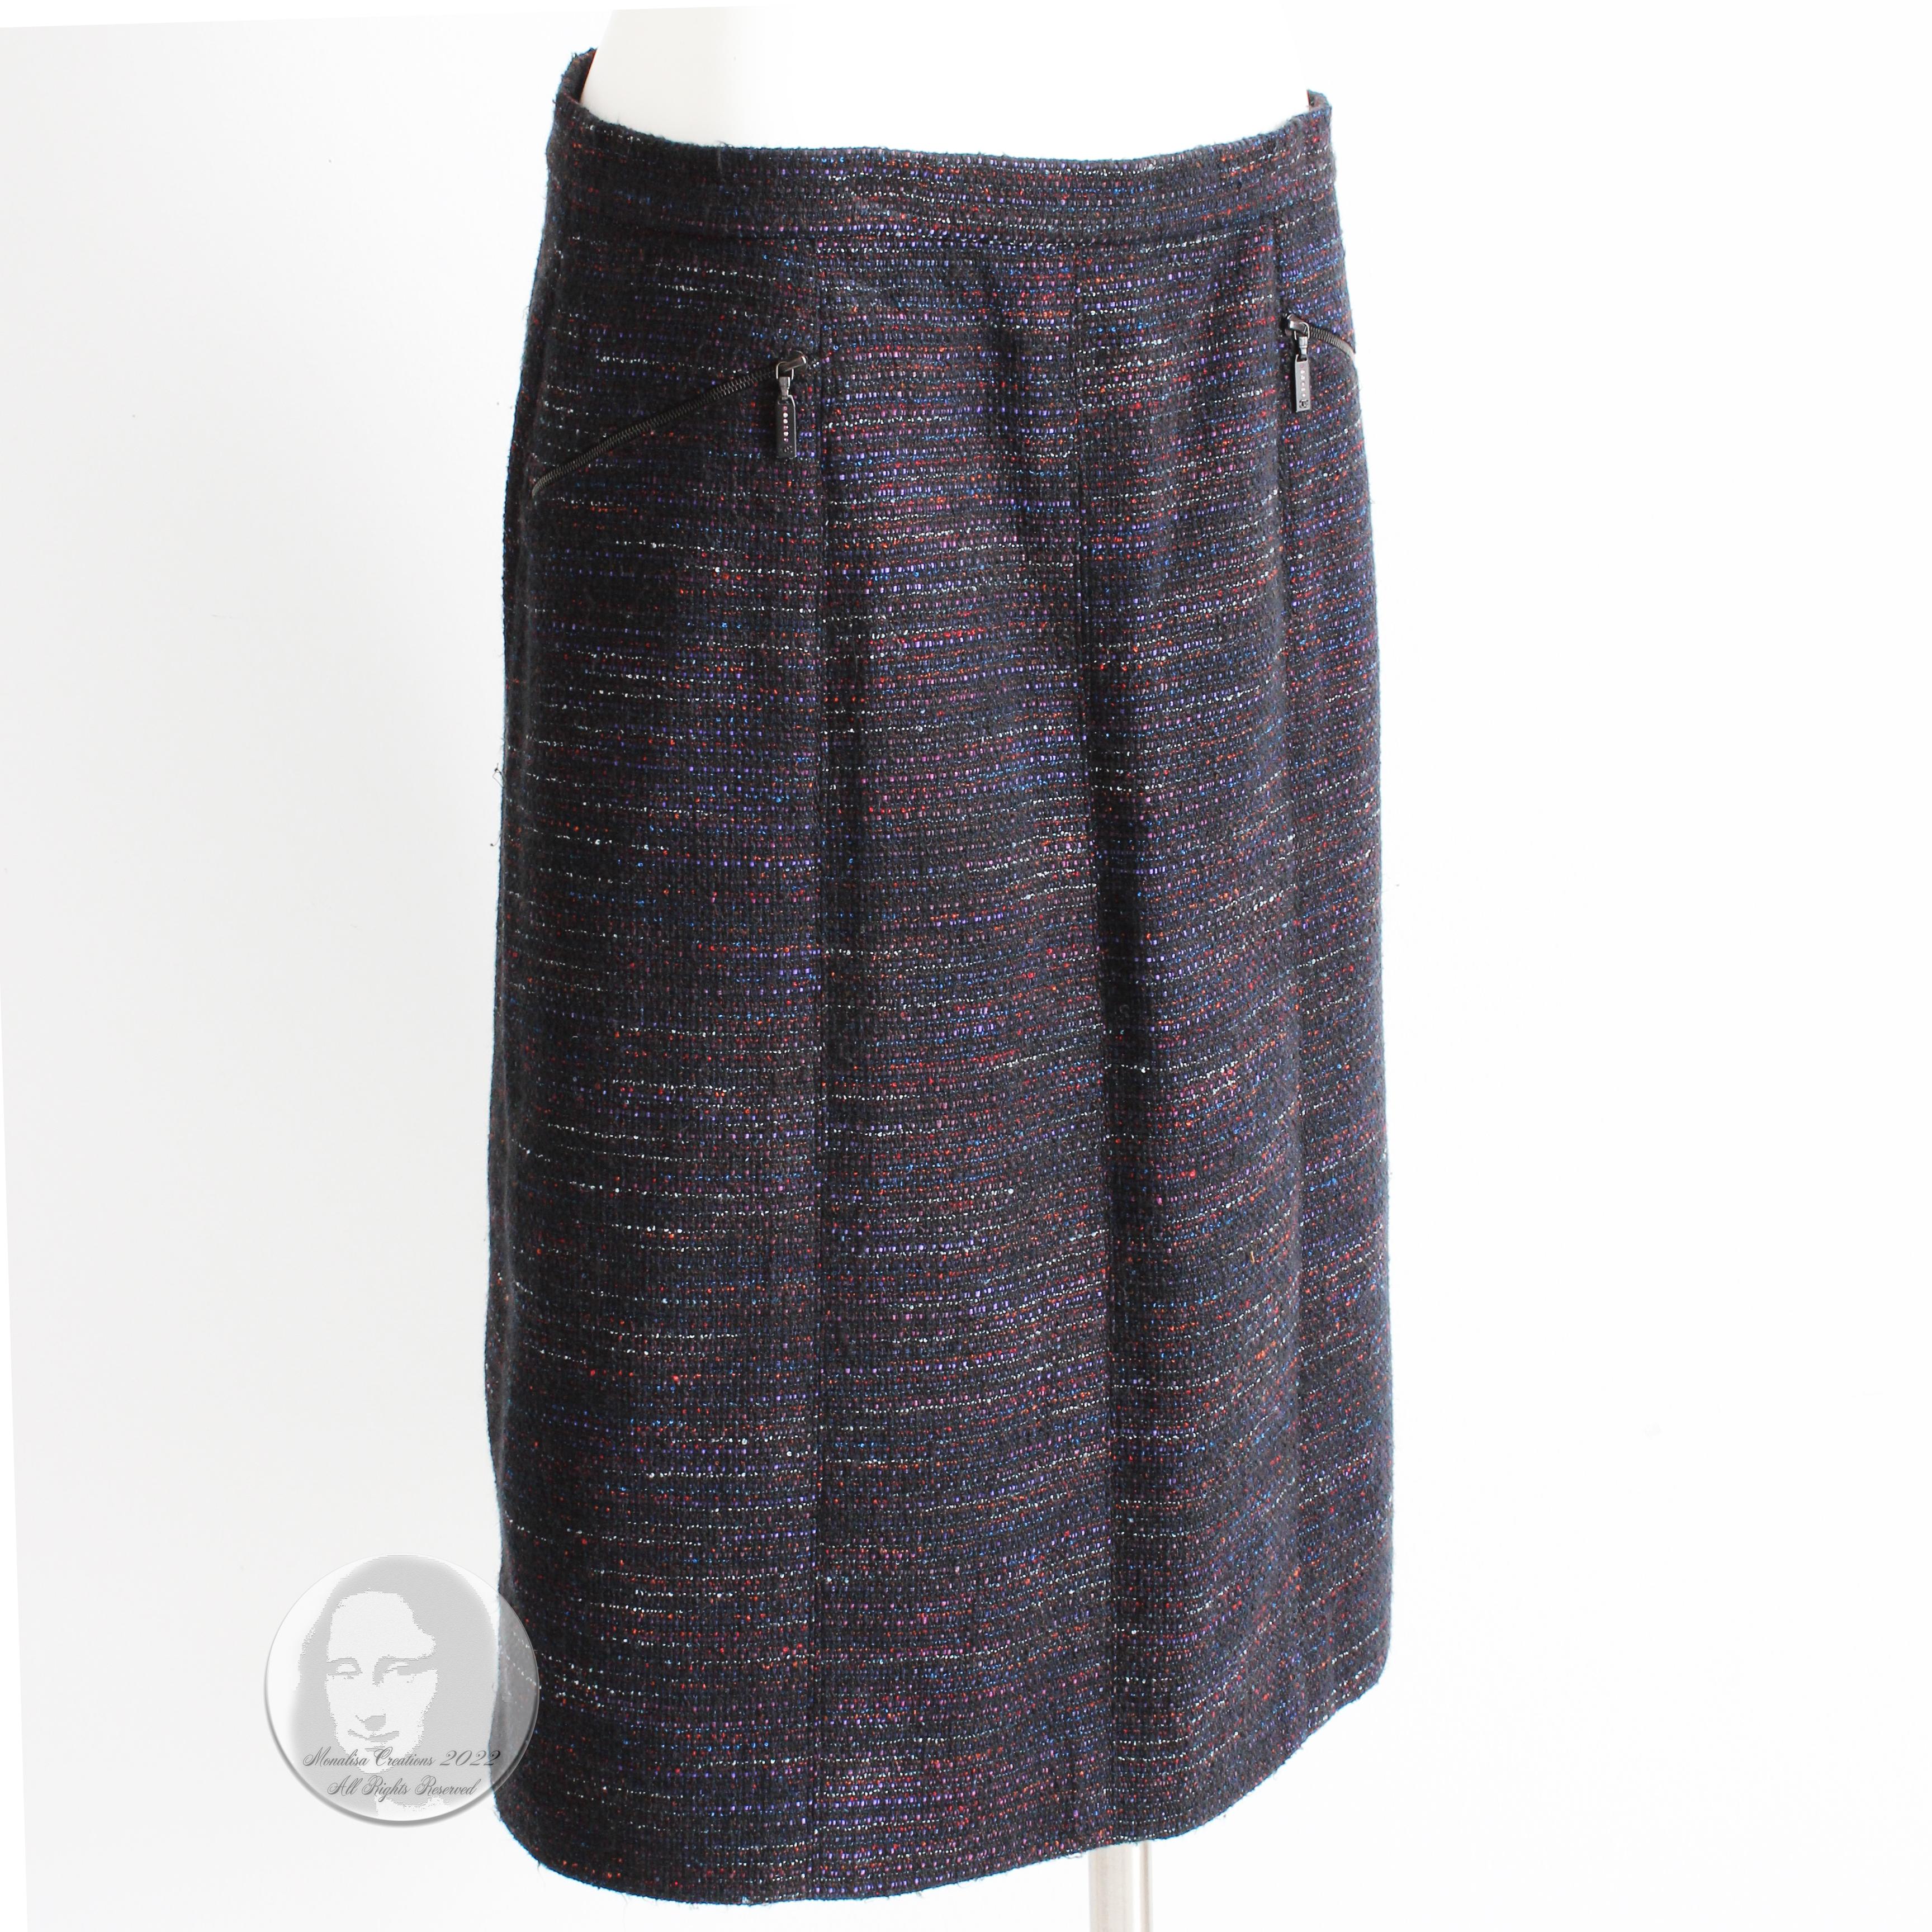 Authentic, preowned and vintage skirt, made by CHANEL for their 02A collection. Made from a gorgeous supple tweed with multicolor thread woven against a black background, it features two embellished CC zipper pull pockets in front and a CC button